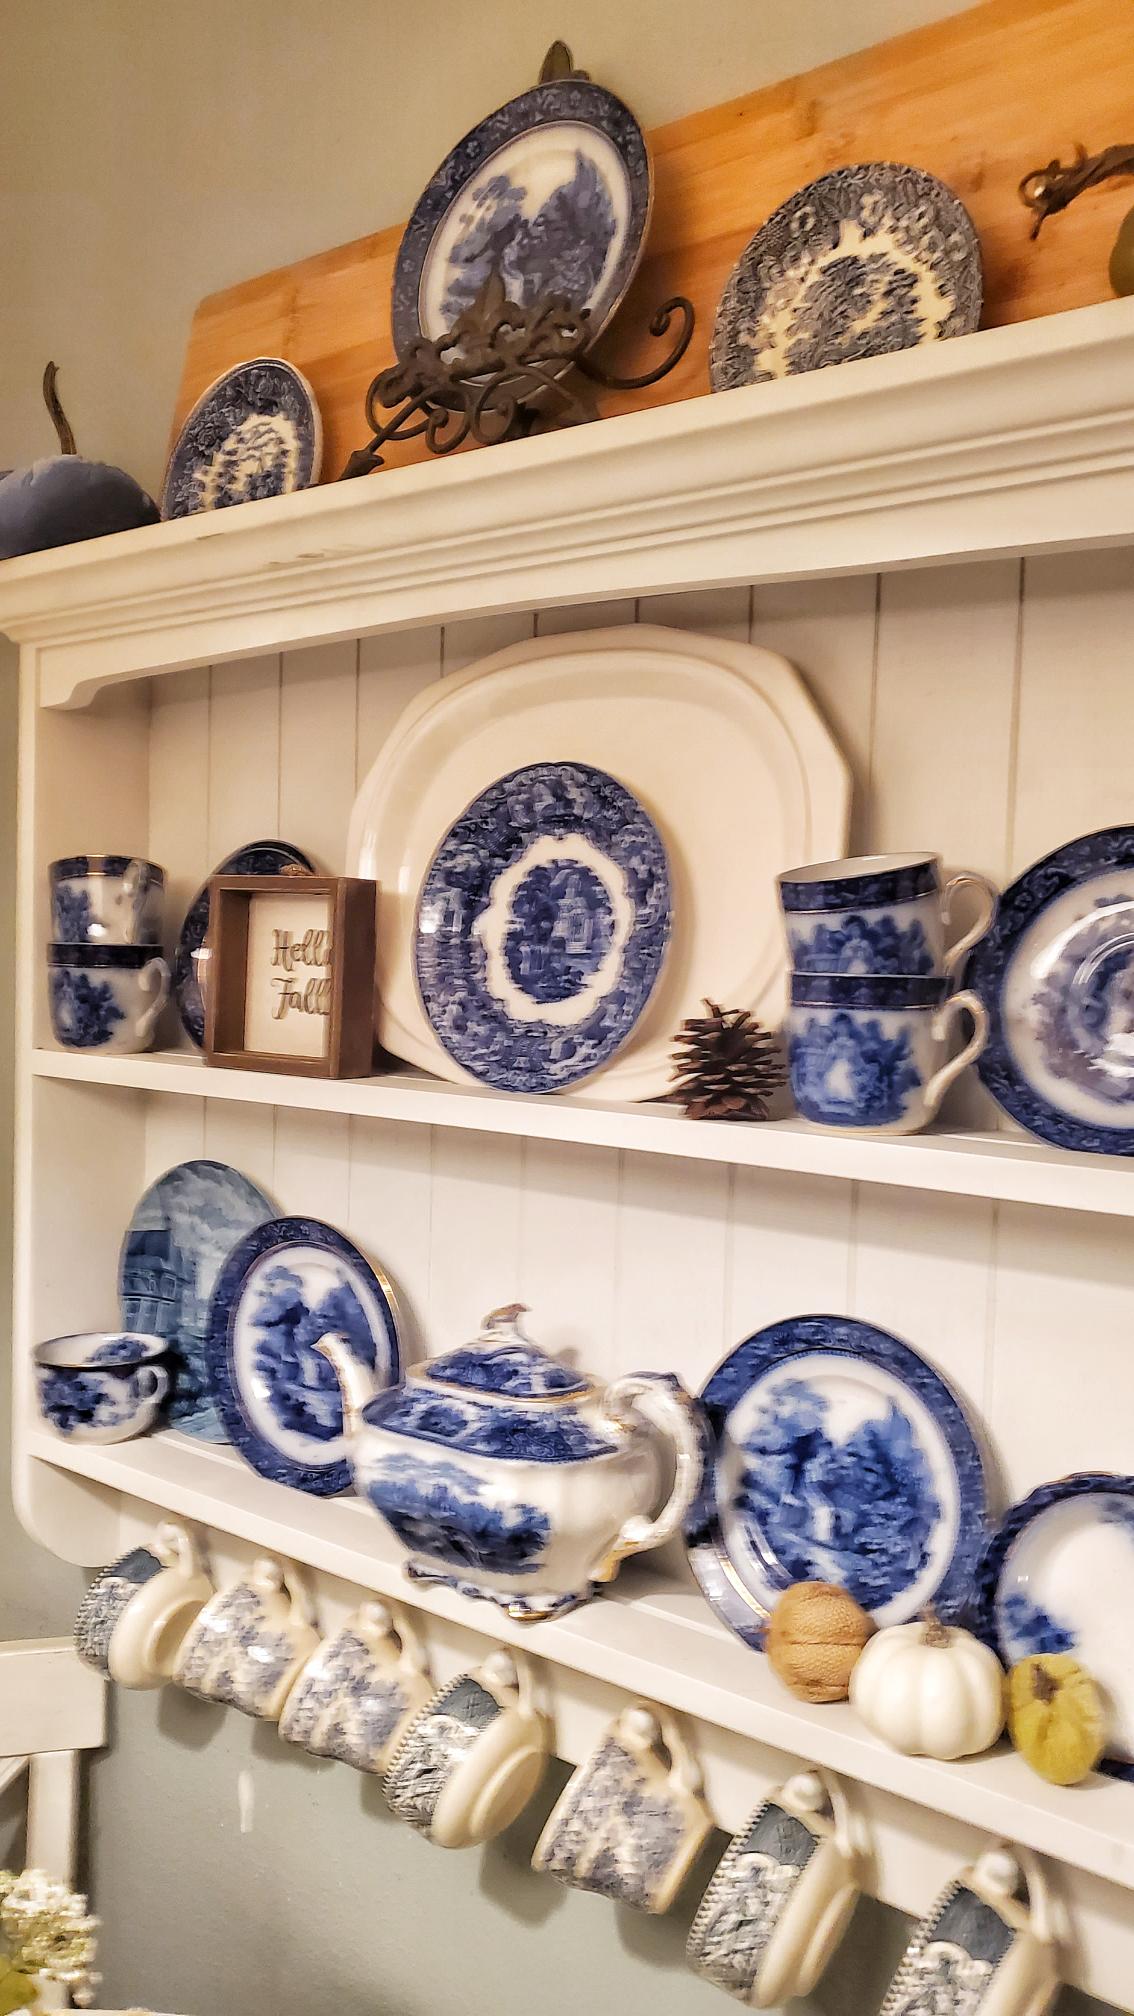 Flow blue dishes on a wall shelf. Fall touches added to dishes shelf.